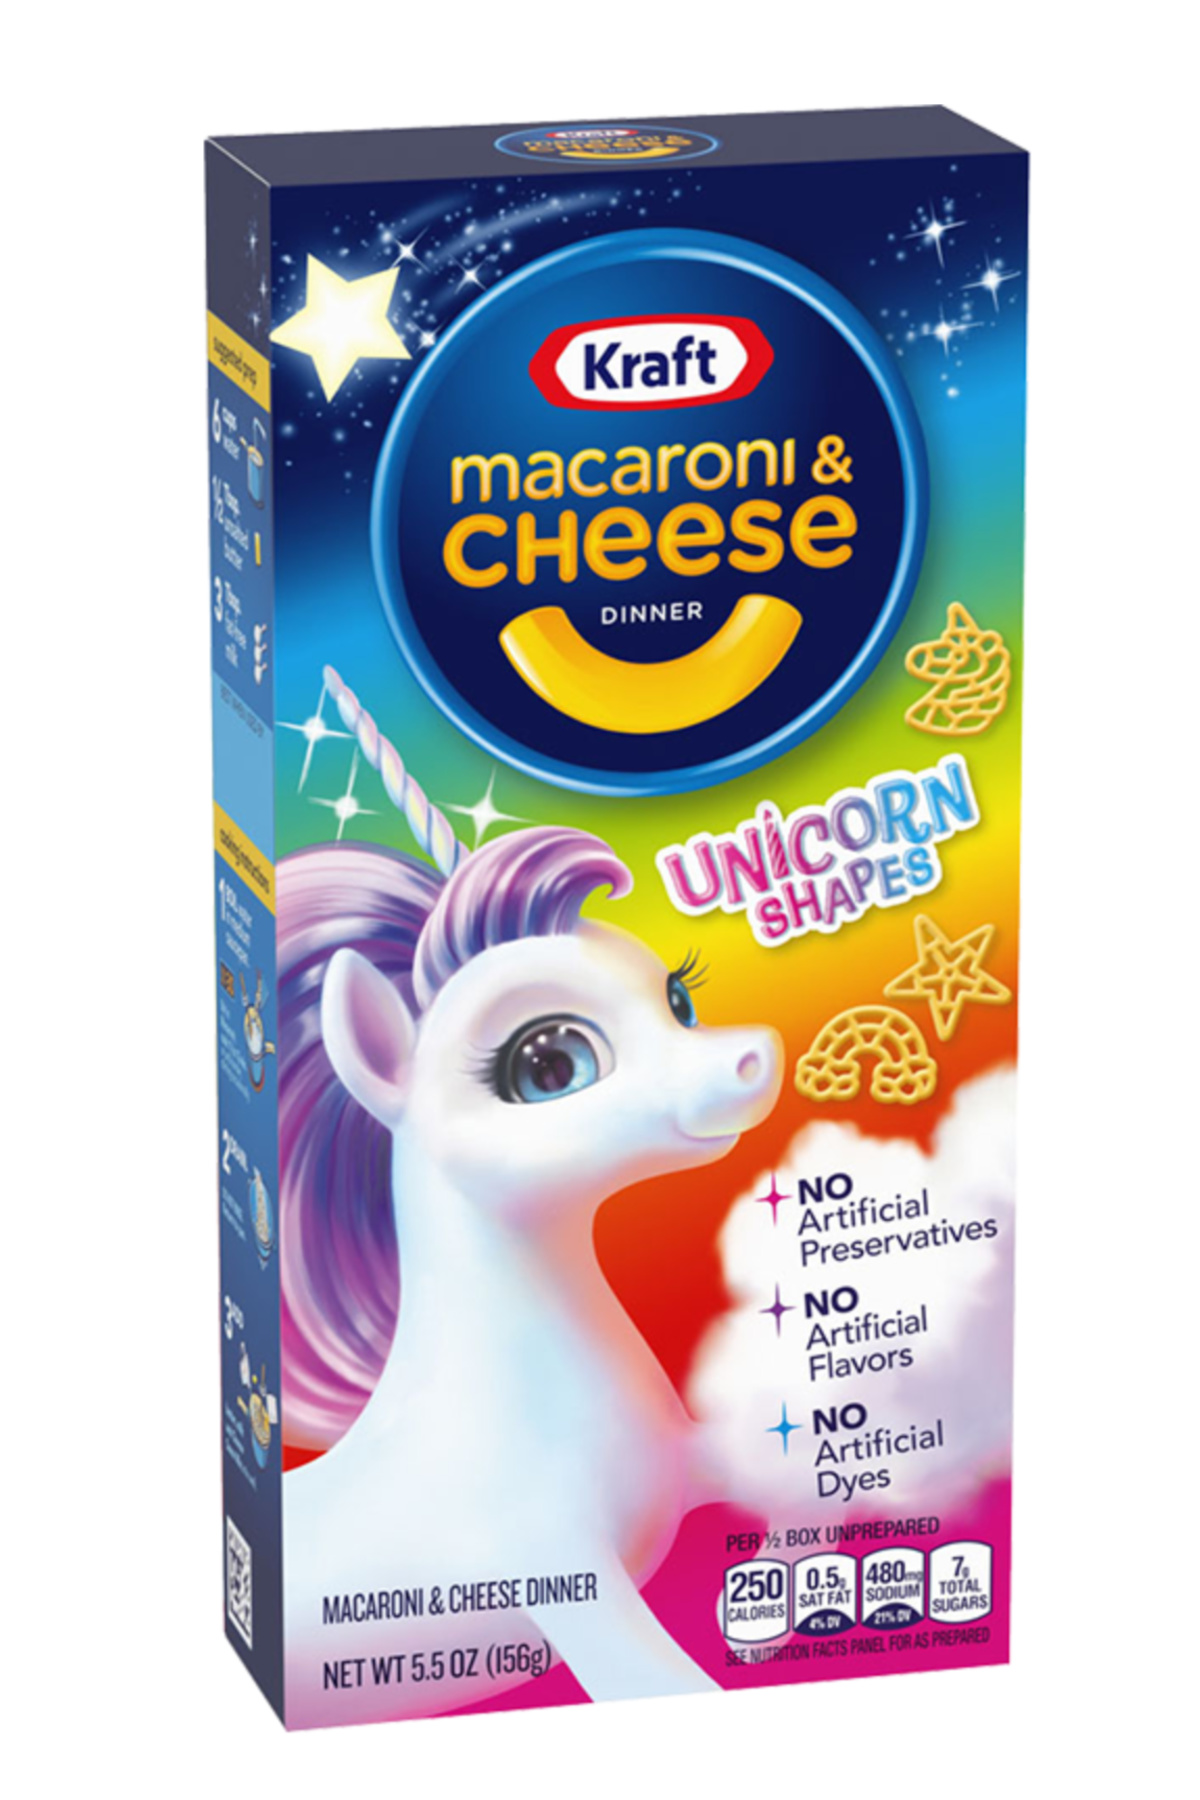 We have the scoop on the new unicorn shaped mac n cheese from Kraft! | coolmomeats.com